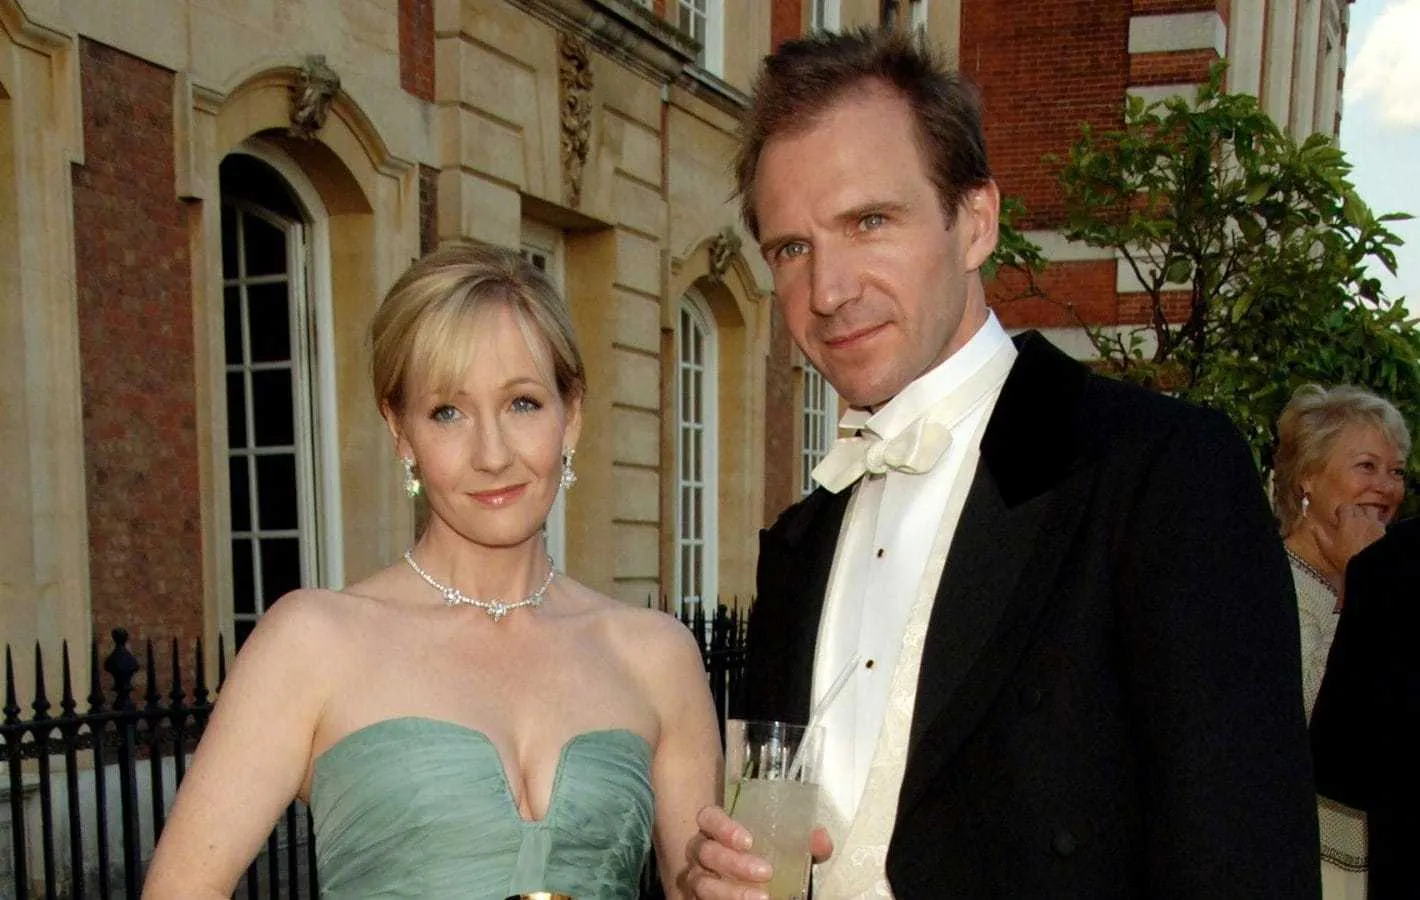 "Lord Voldemort" Ralph Fiennes: The cyberbullying of J. K. Rowling is disgusting and appalling | FMV6